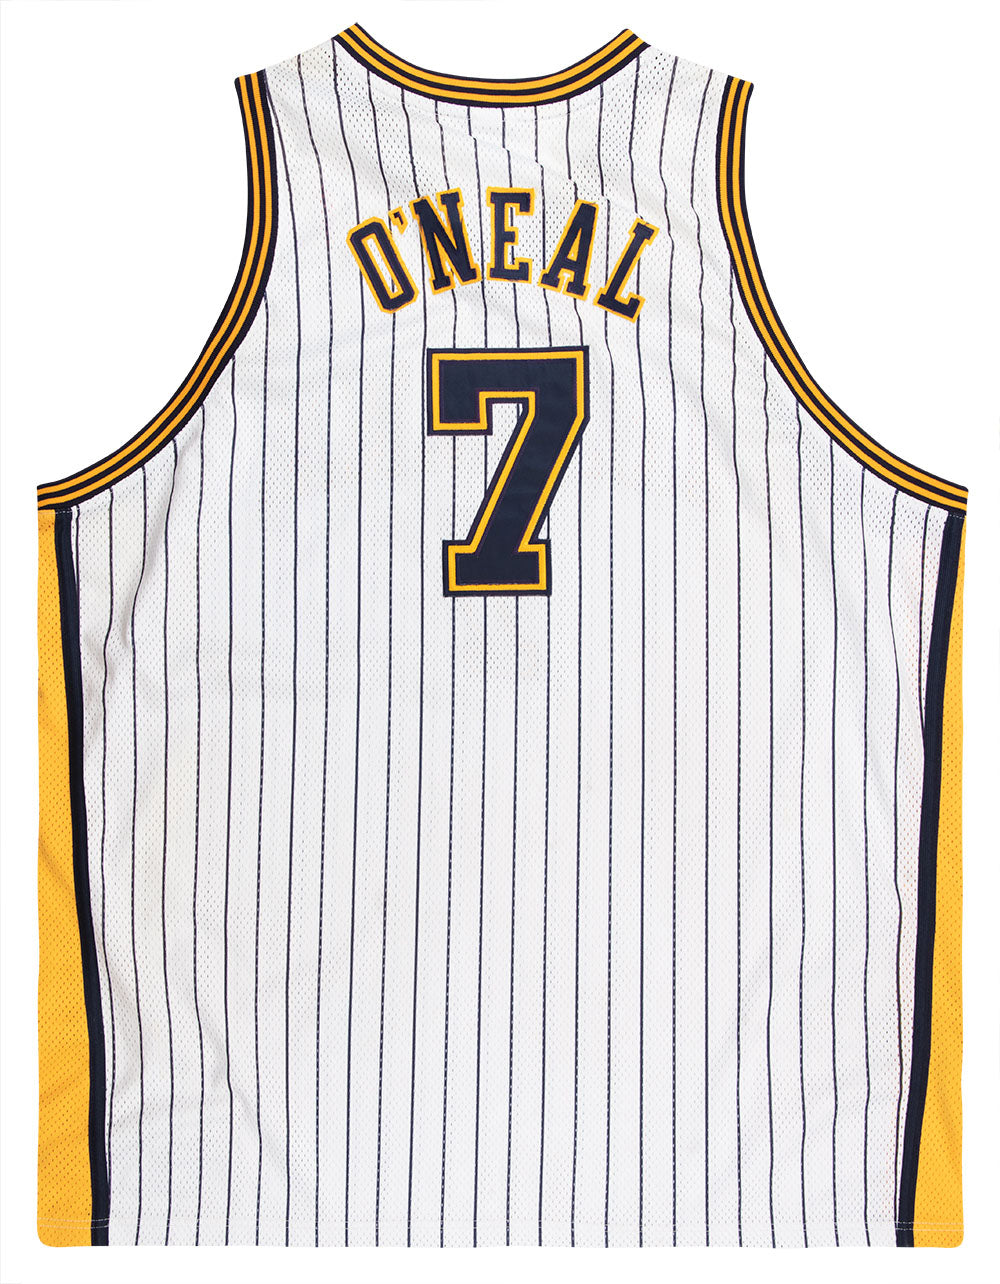 Indiana Pacers Throwback Apparel & Jerseys